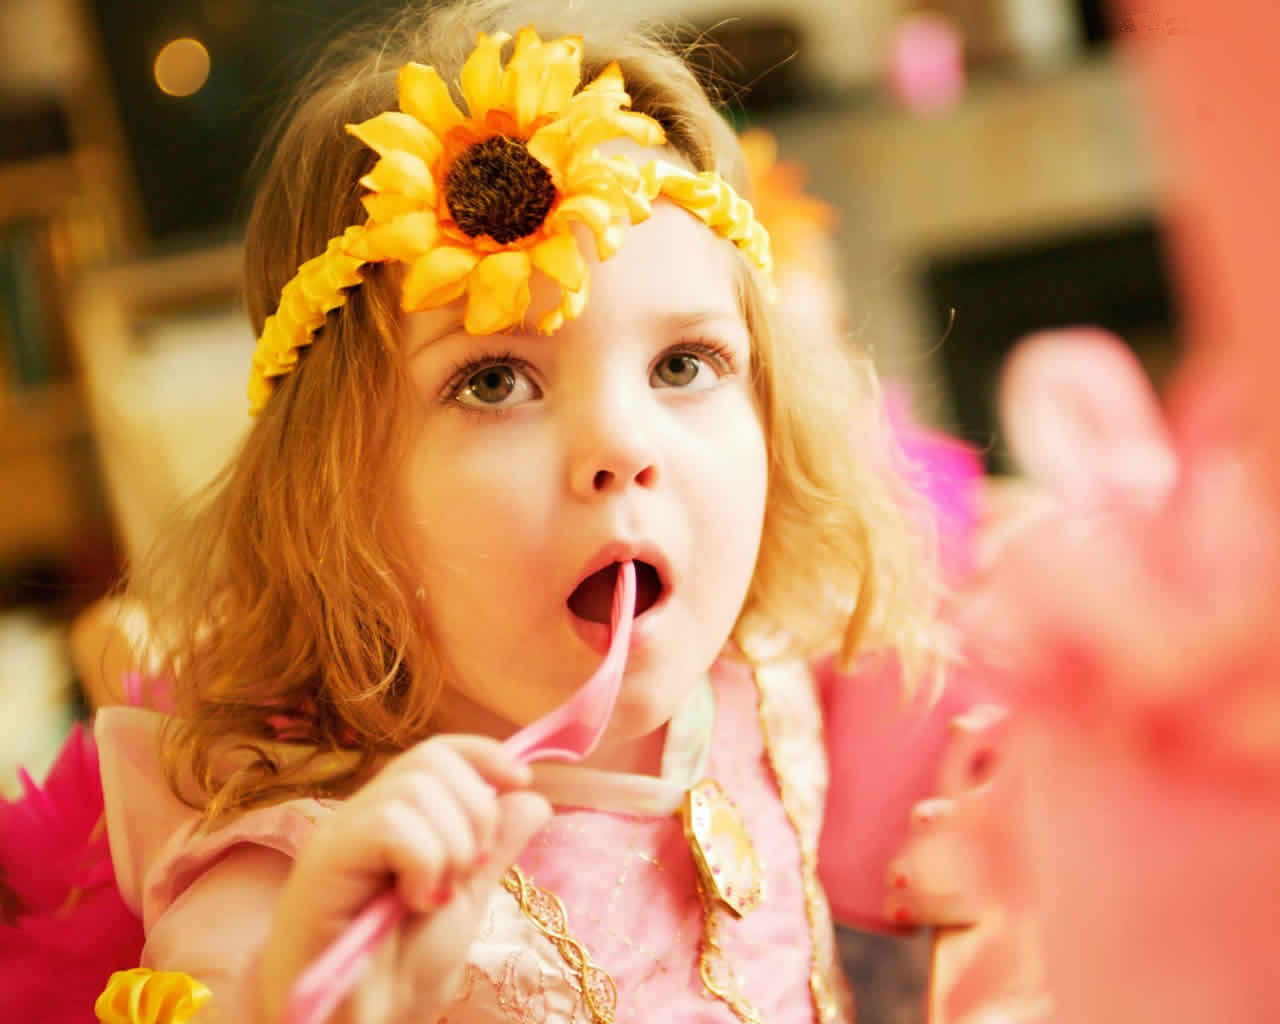 nice and cute wallpaper,child,face,pink,yellow,beauty